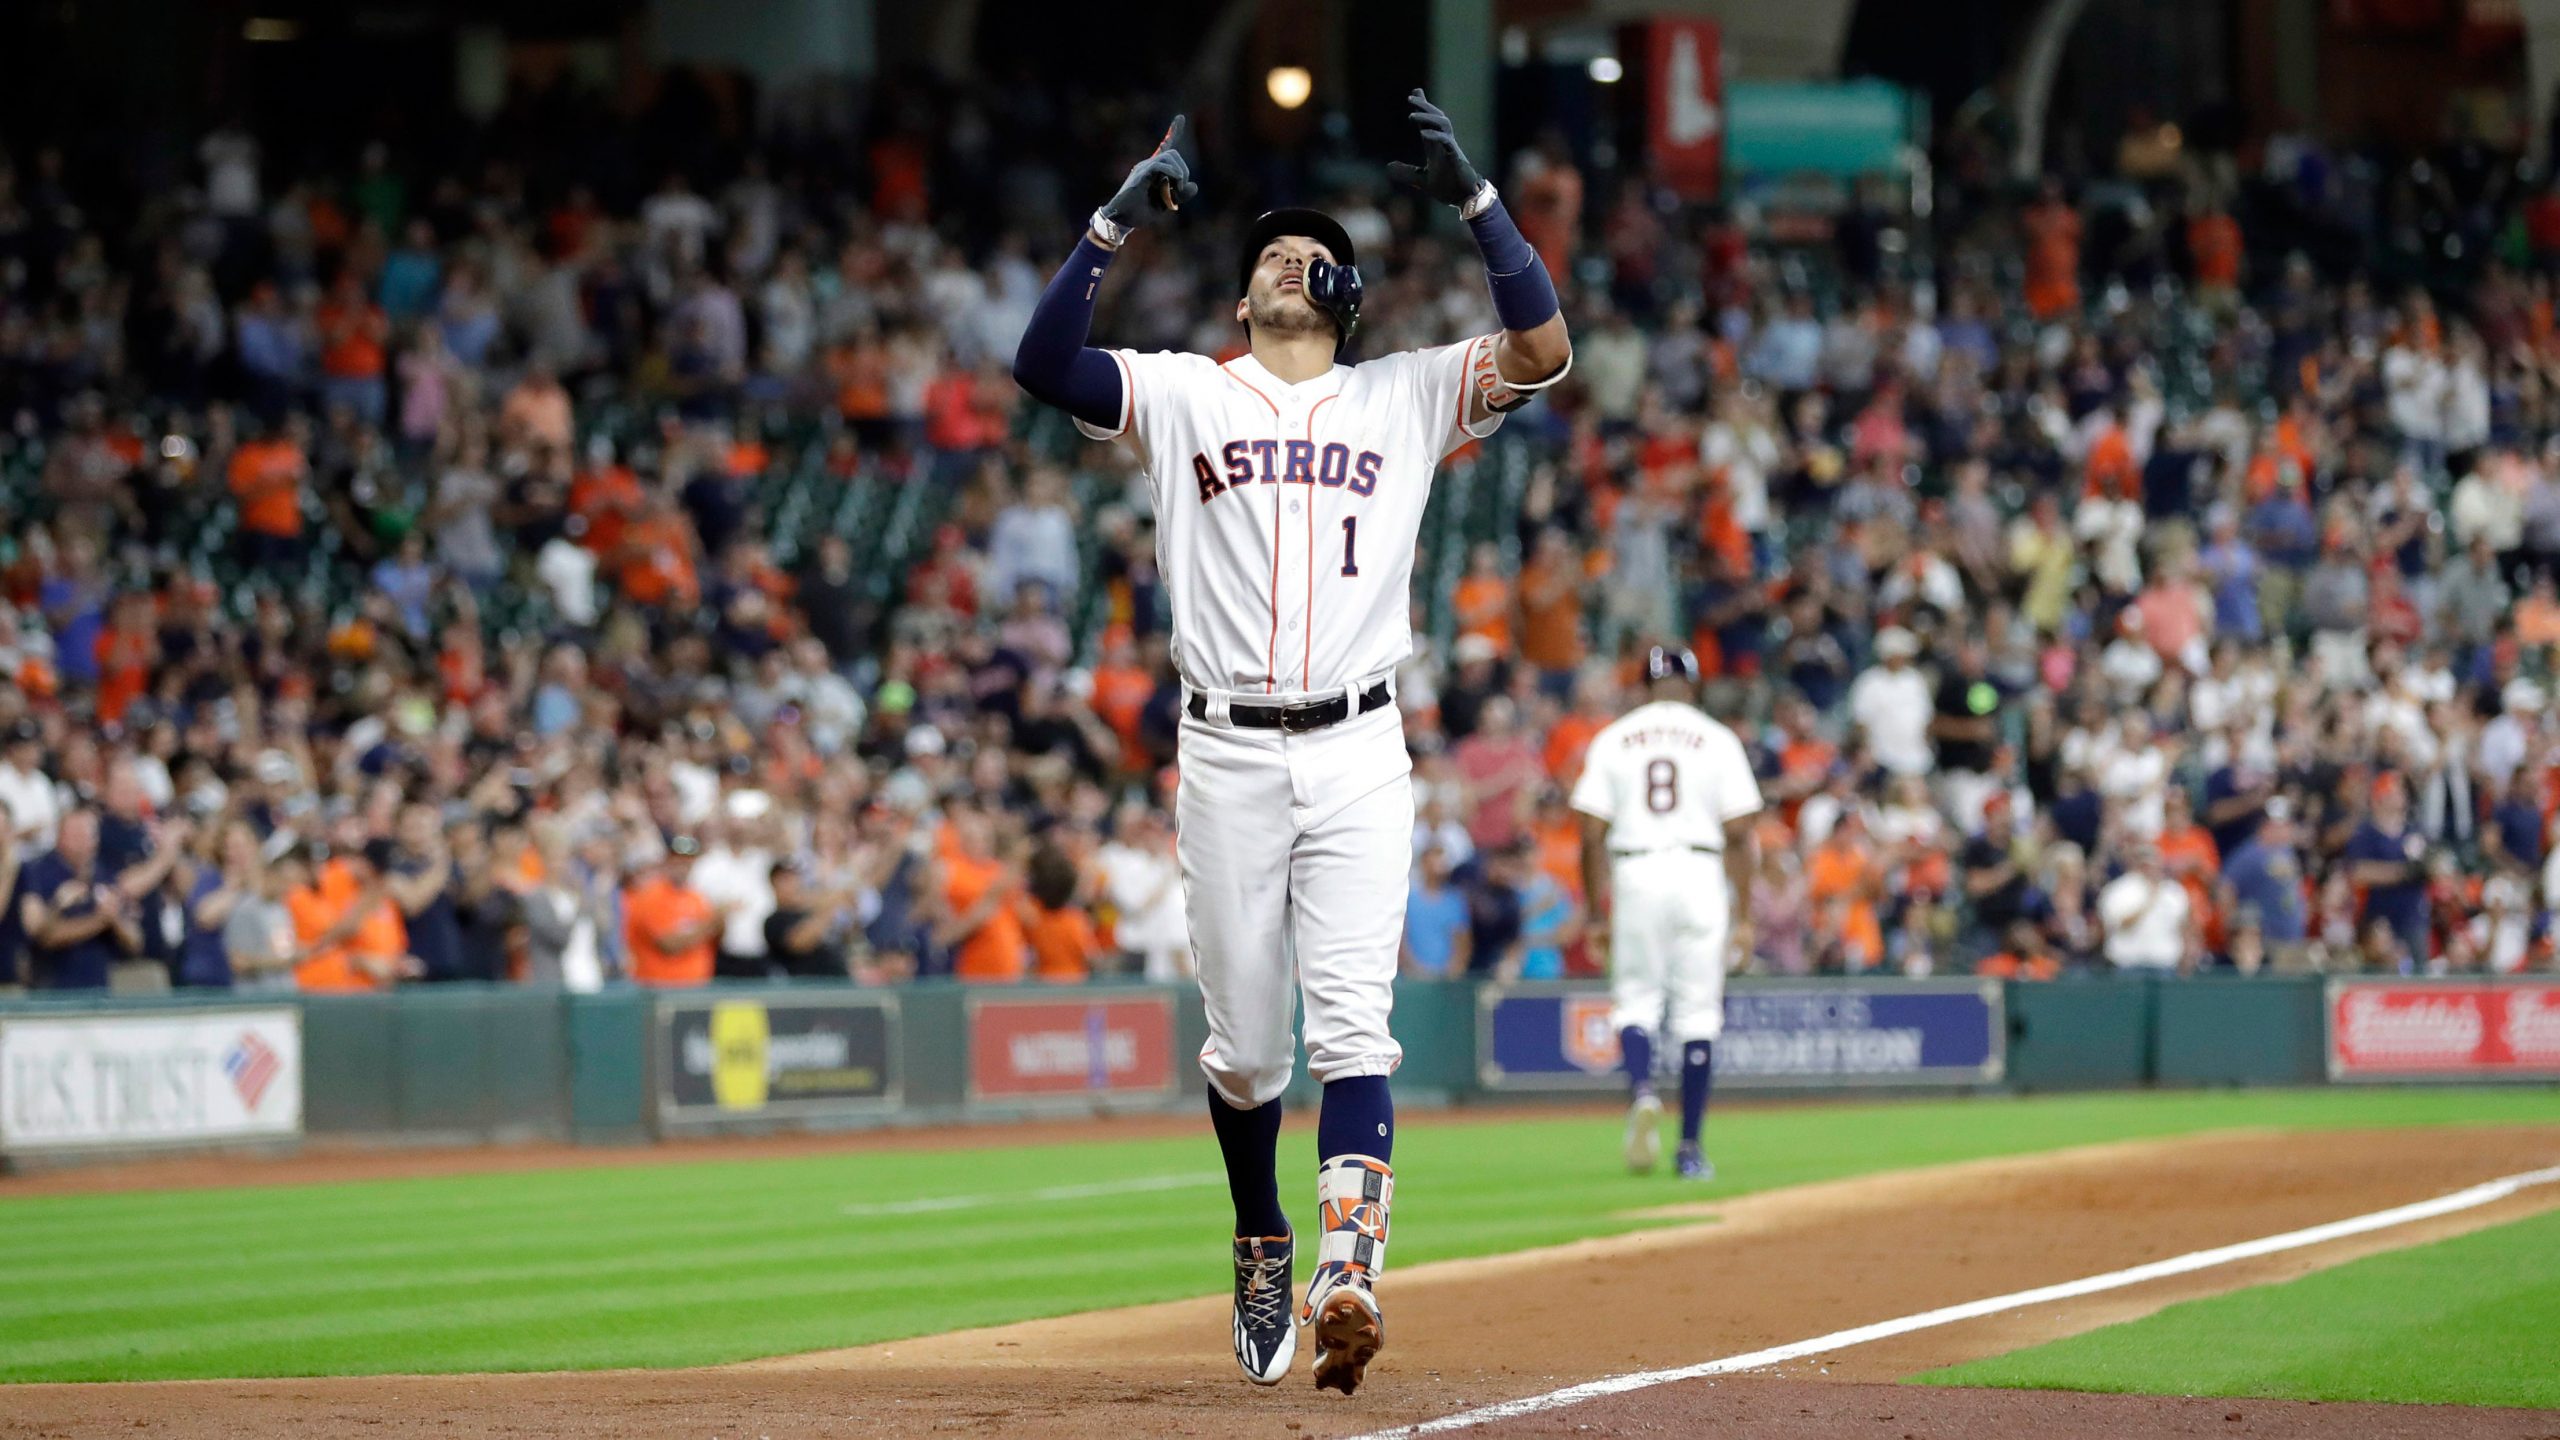 Carlos Correa has 2 HRs, 4 RBIs to lead Astros over A's